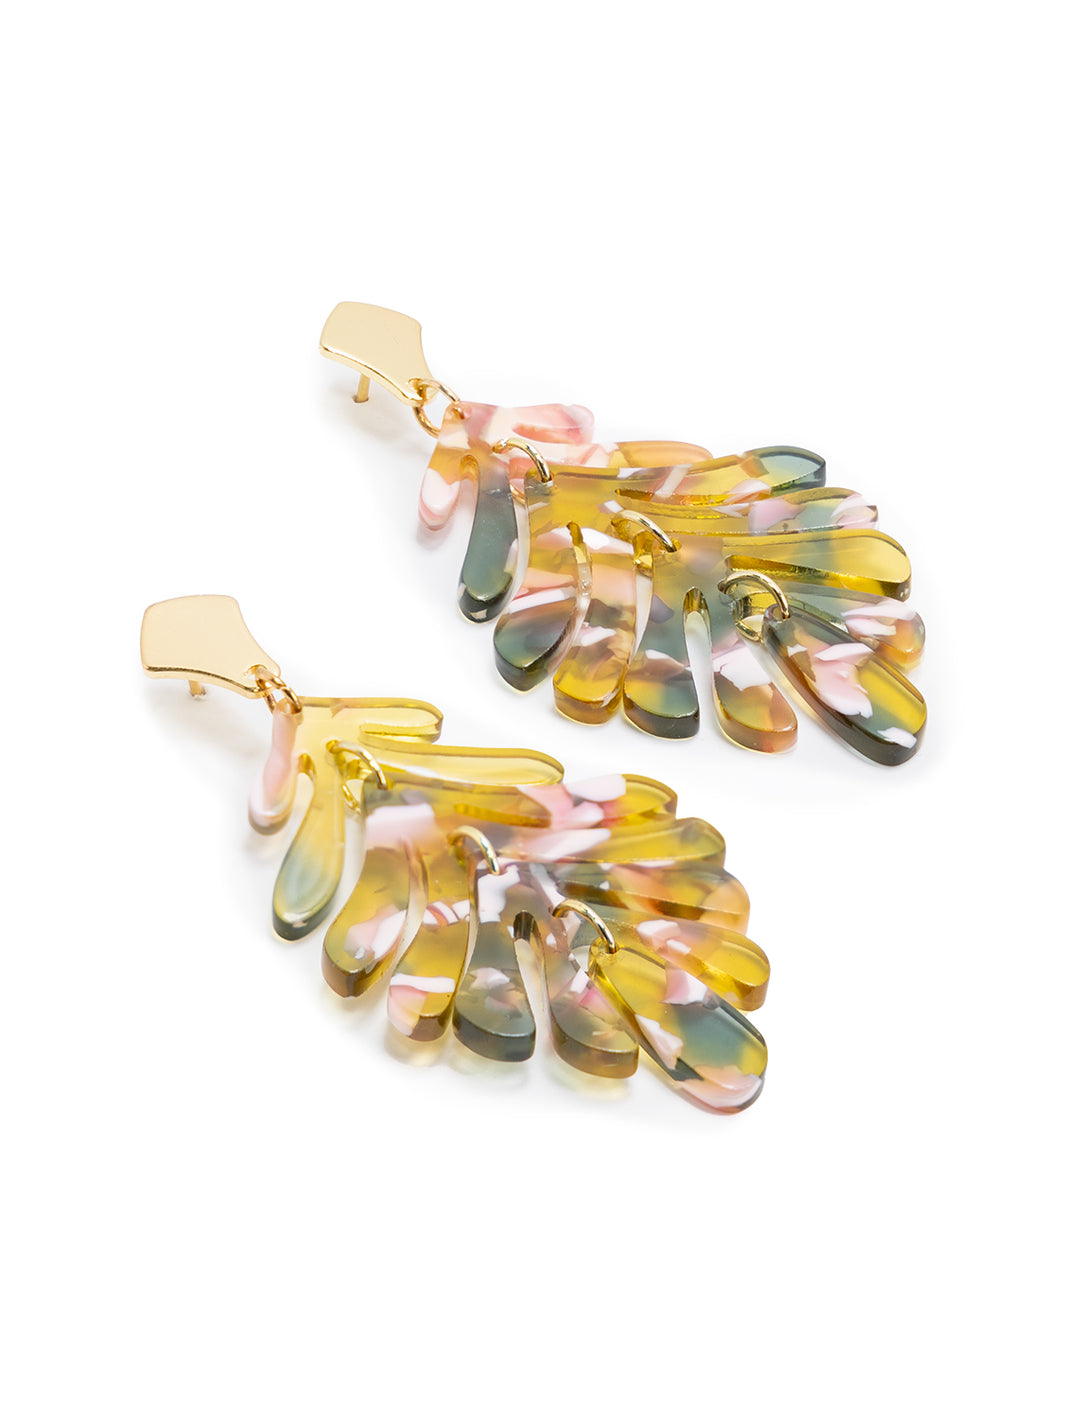 Stylized laydown of St Armands' pink and green petite palm earring.